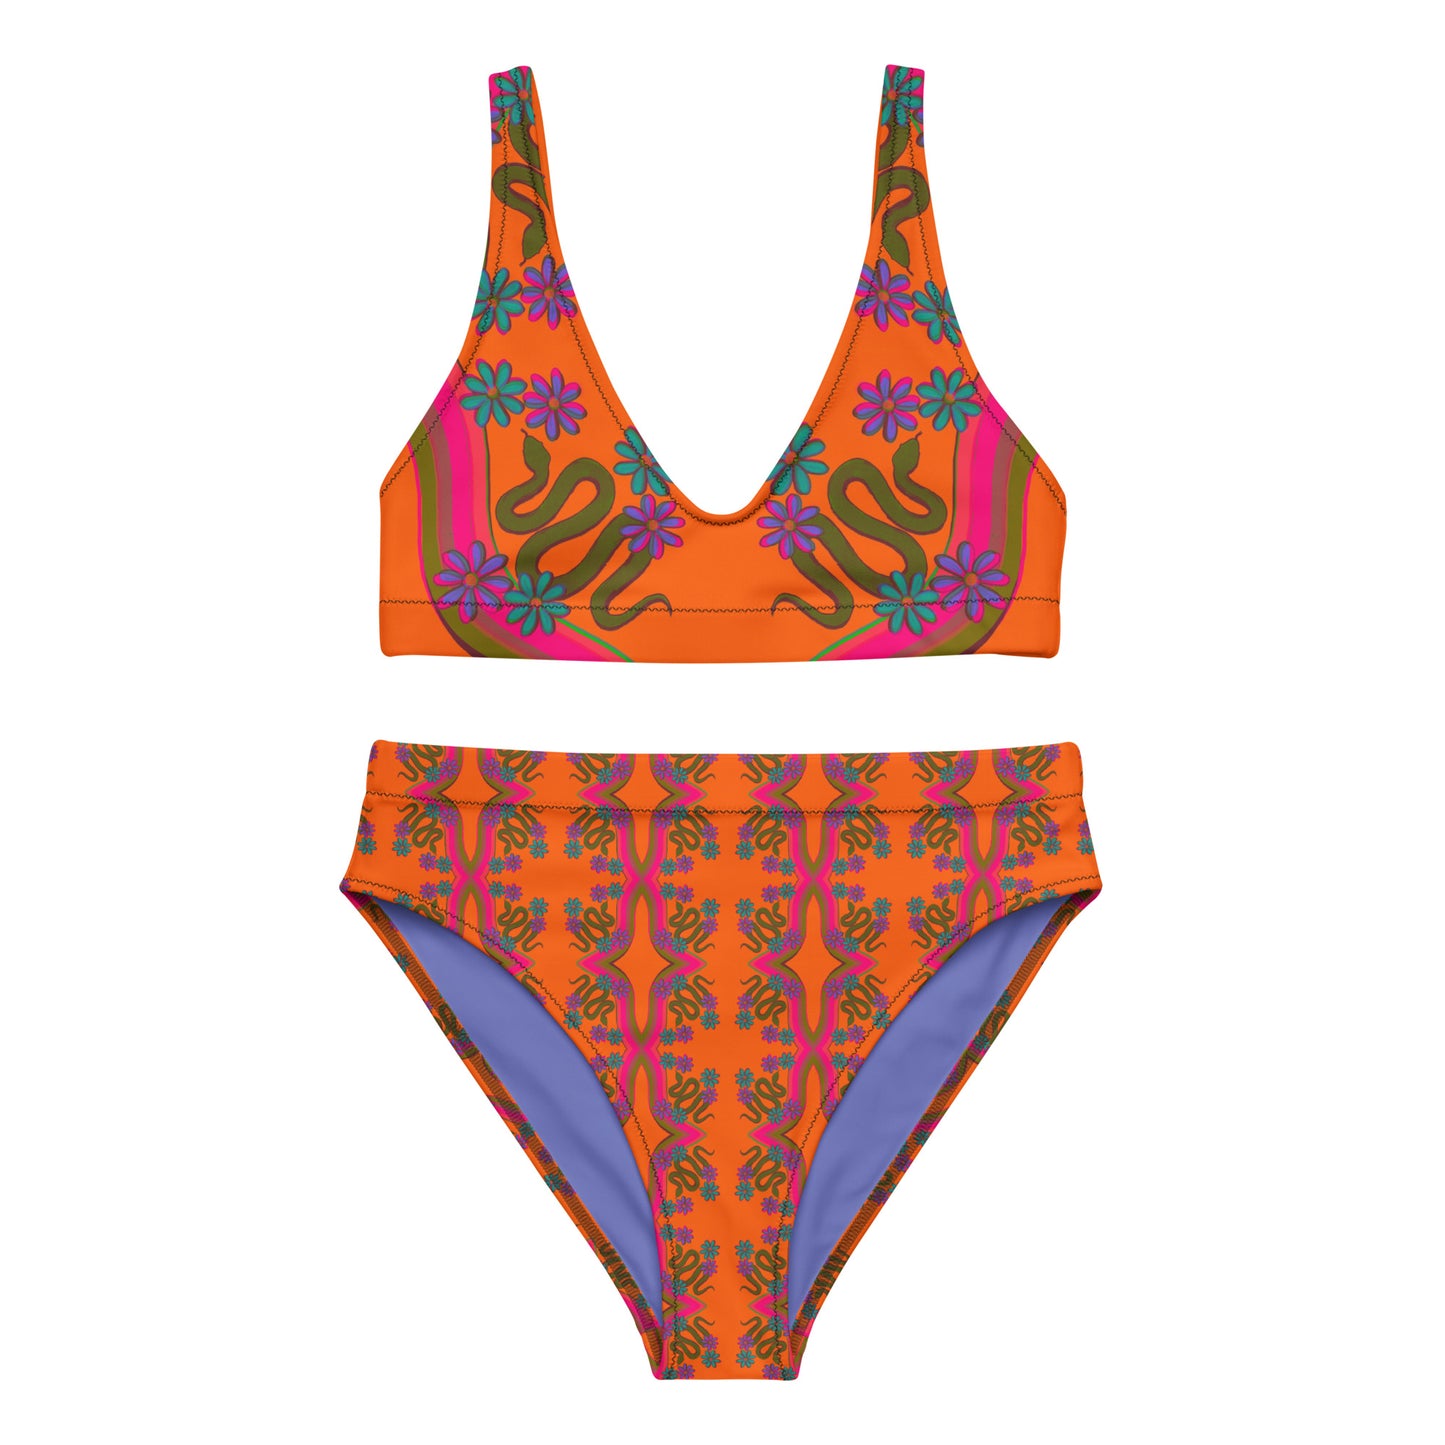 Snake in the bed (Tangerine) High Waisted Two Piece Swimsuit.